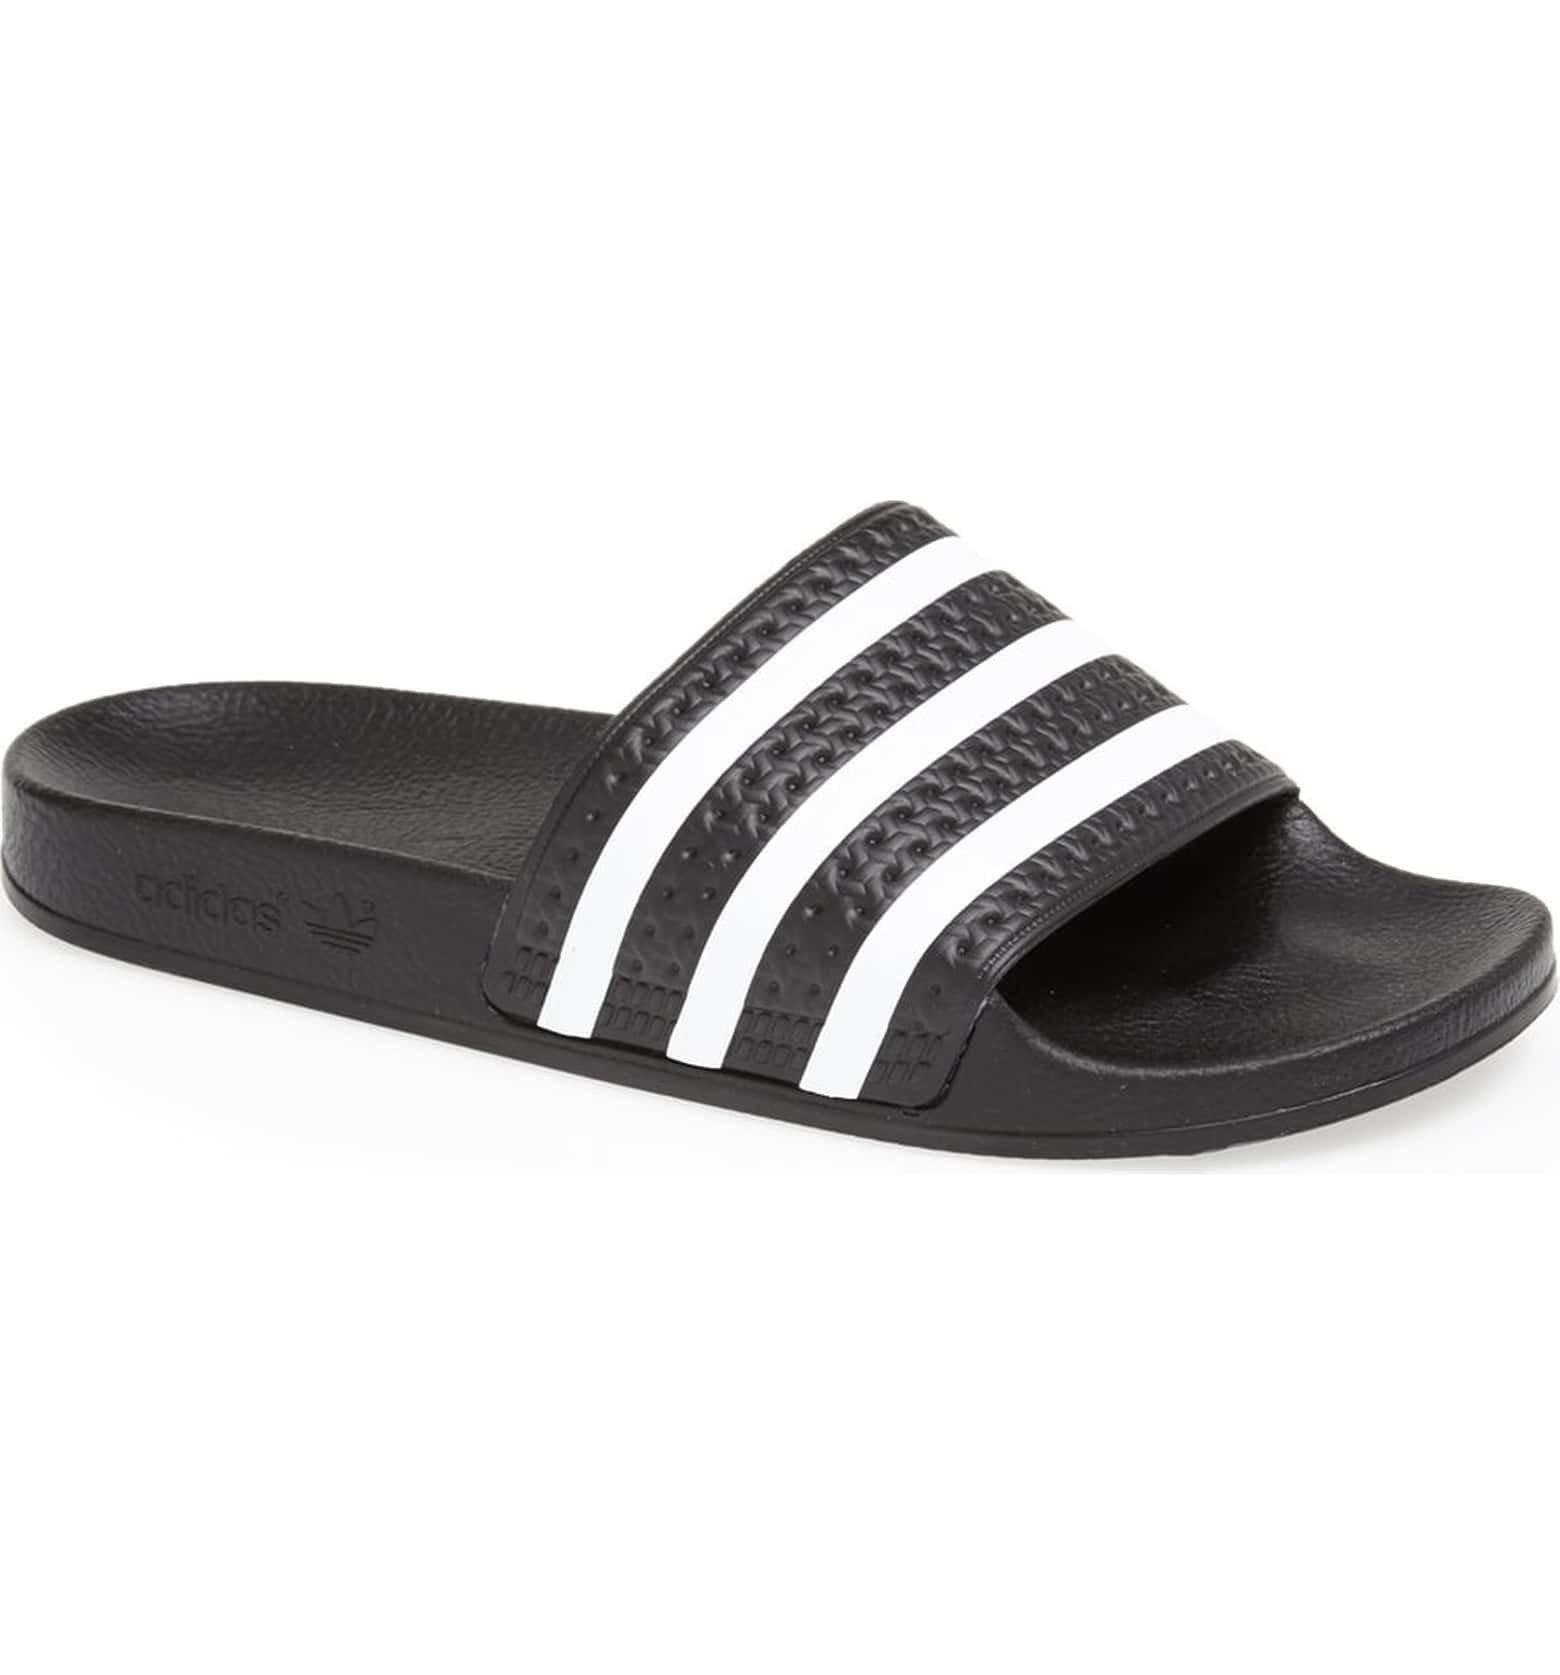 adidas sandals outfits